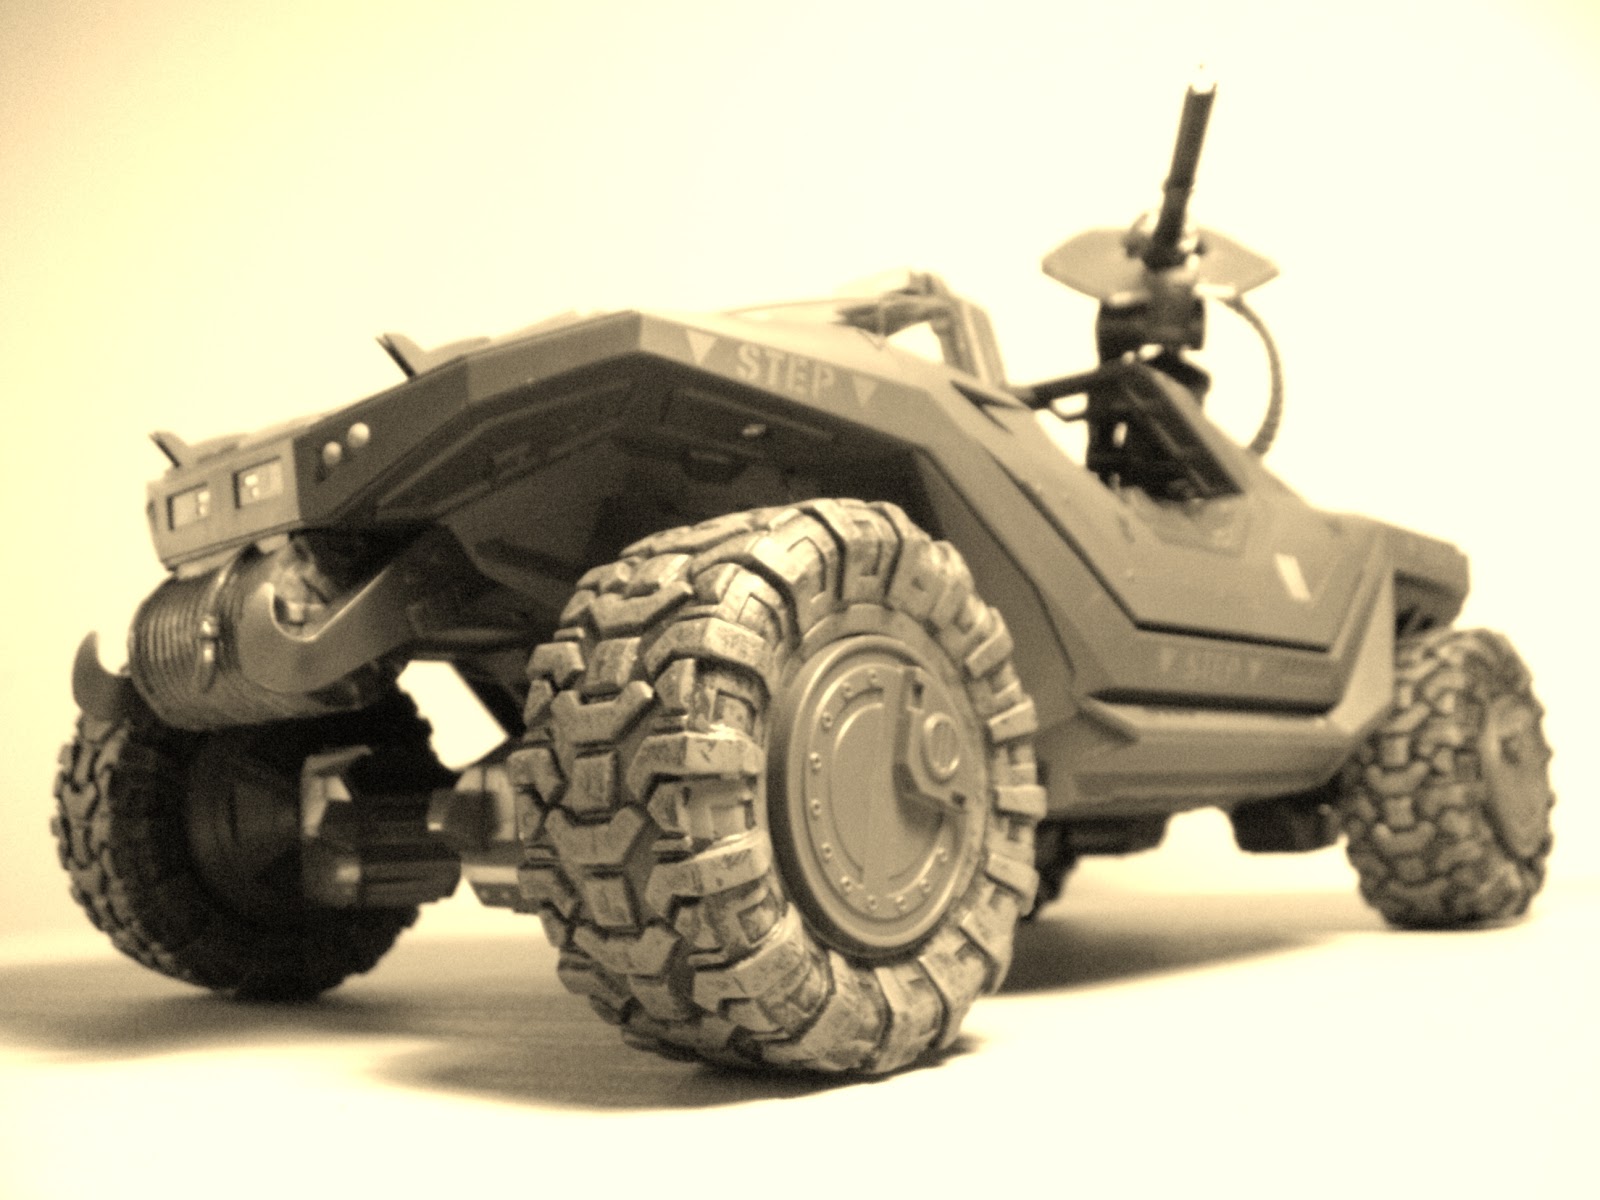 DAILY TOYZ: Collection Exposed : Warthog from Halo